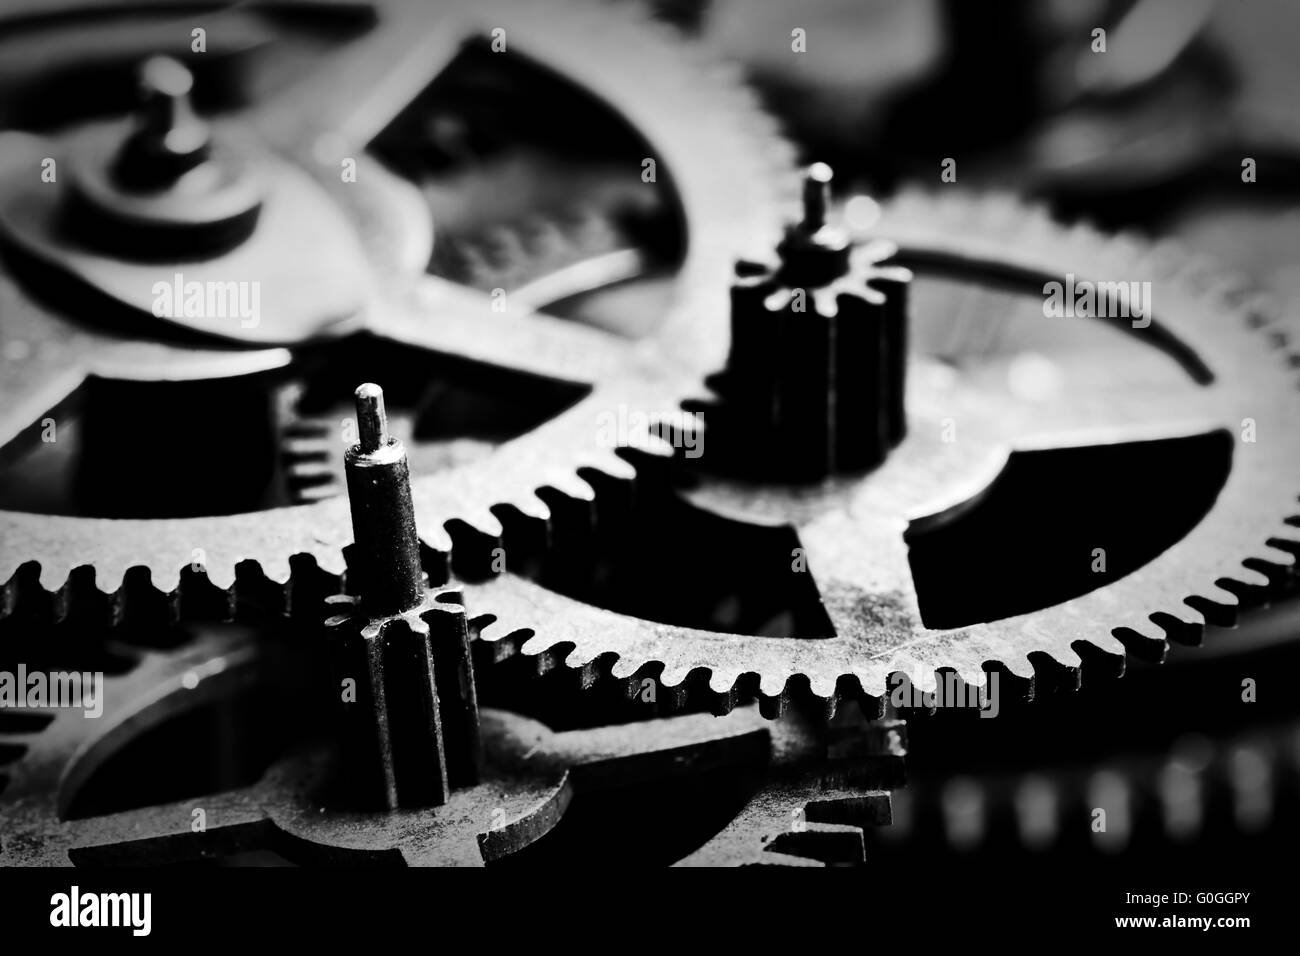 Grunge gear, cog wheels black and white background. Industrial, science Stock Photo